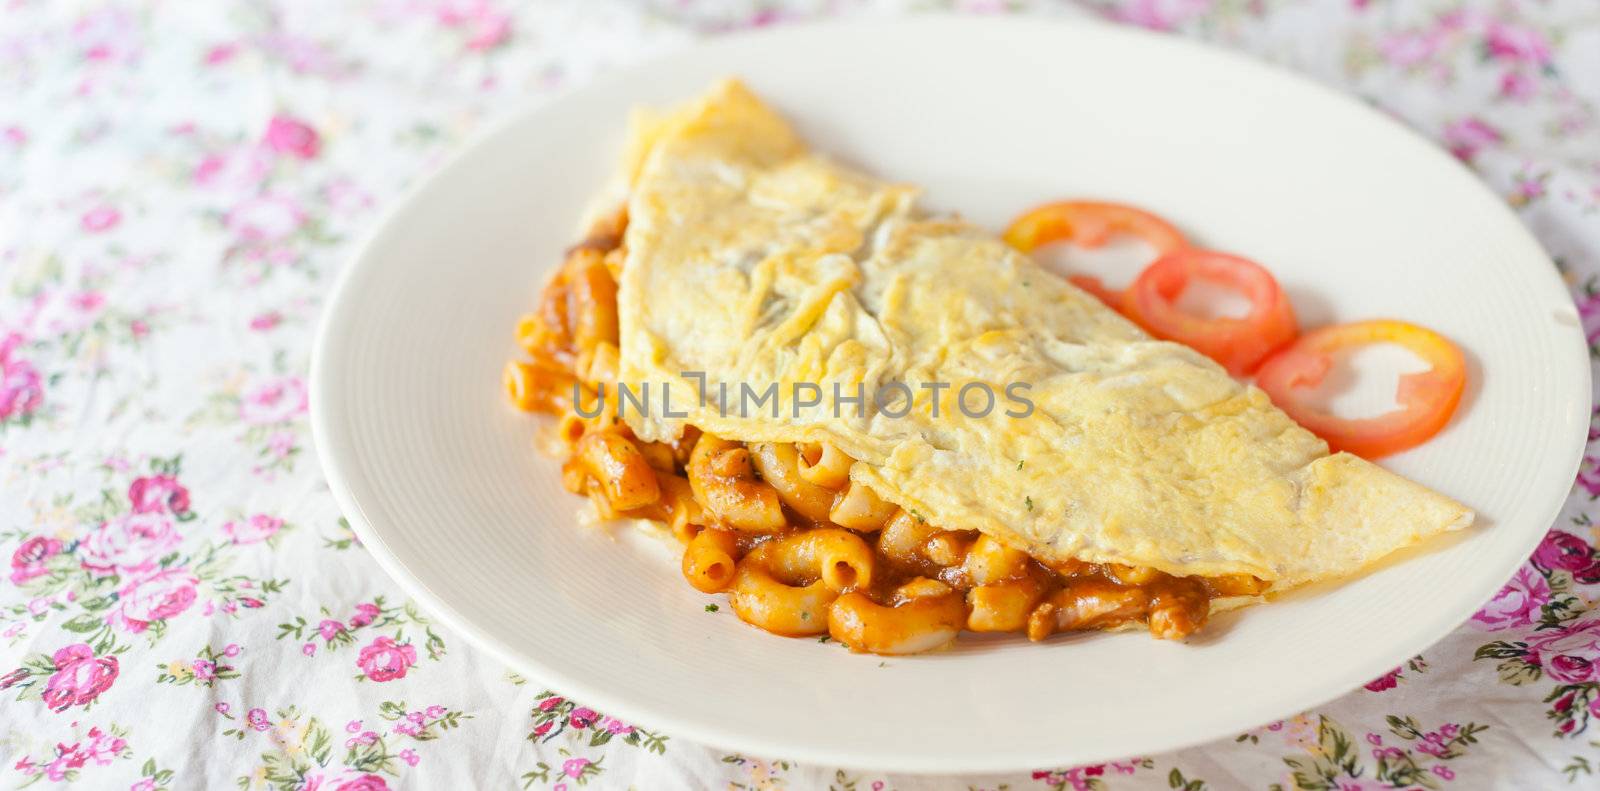 Fried macaroni with tomato sauce wrapped with omelette by moggara12